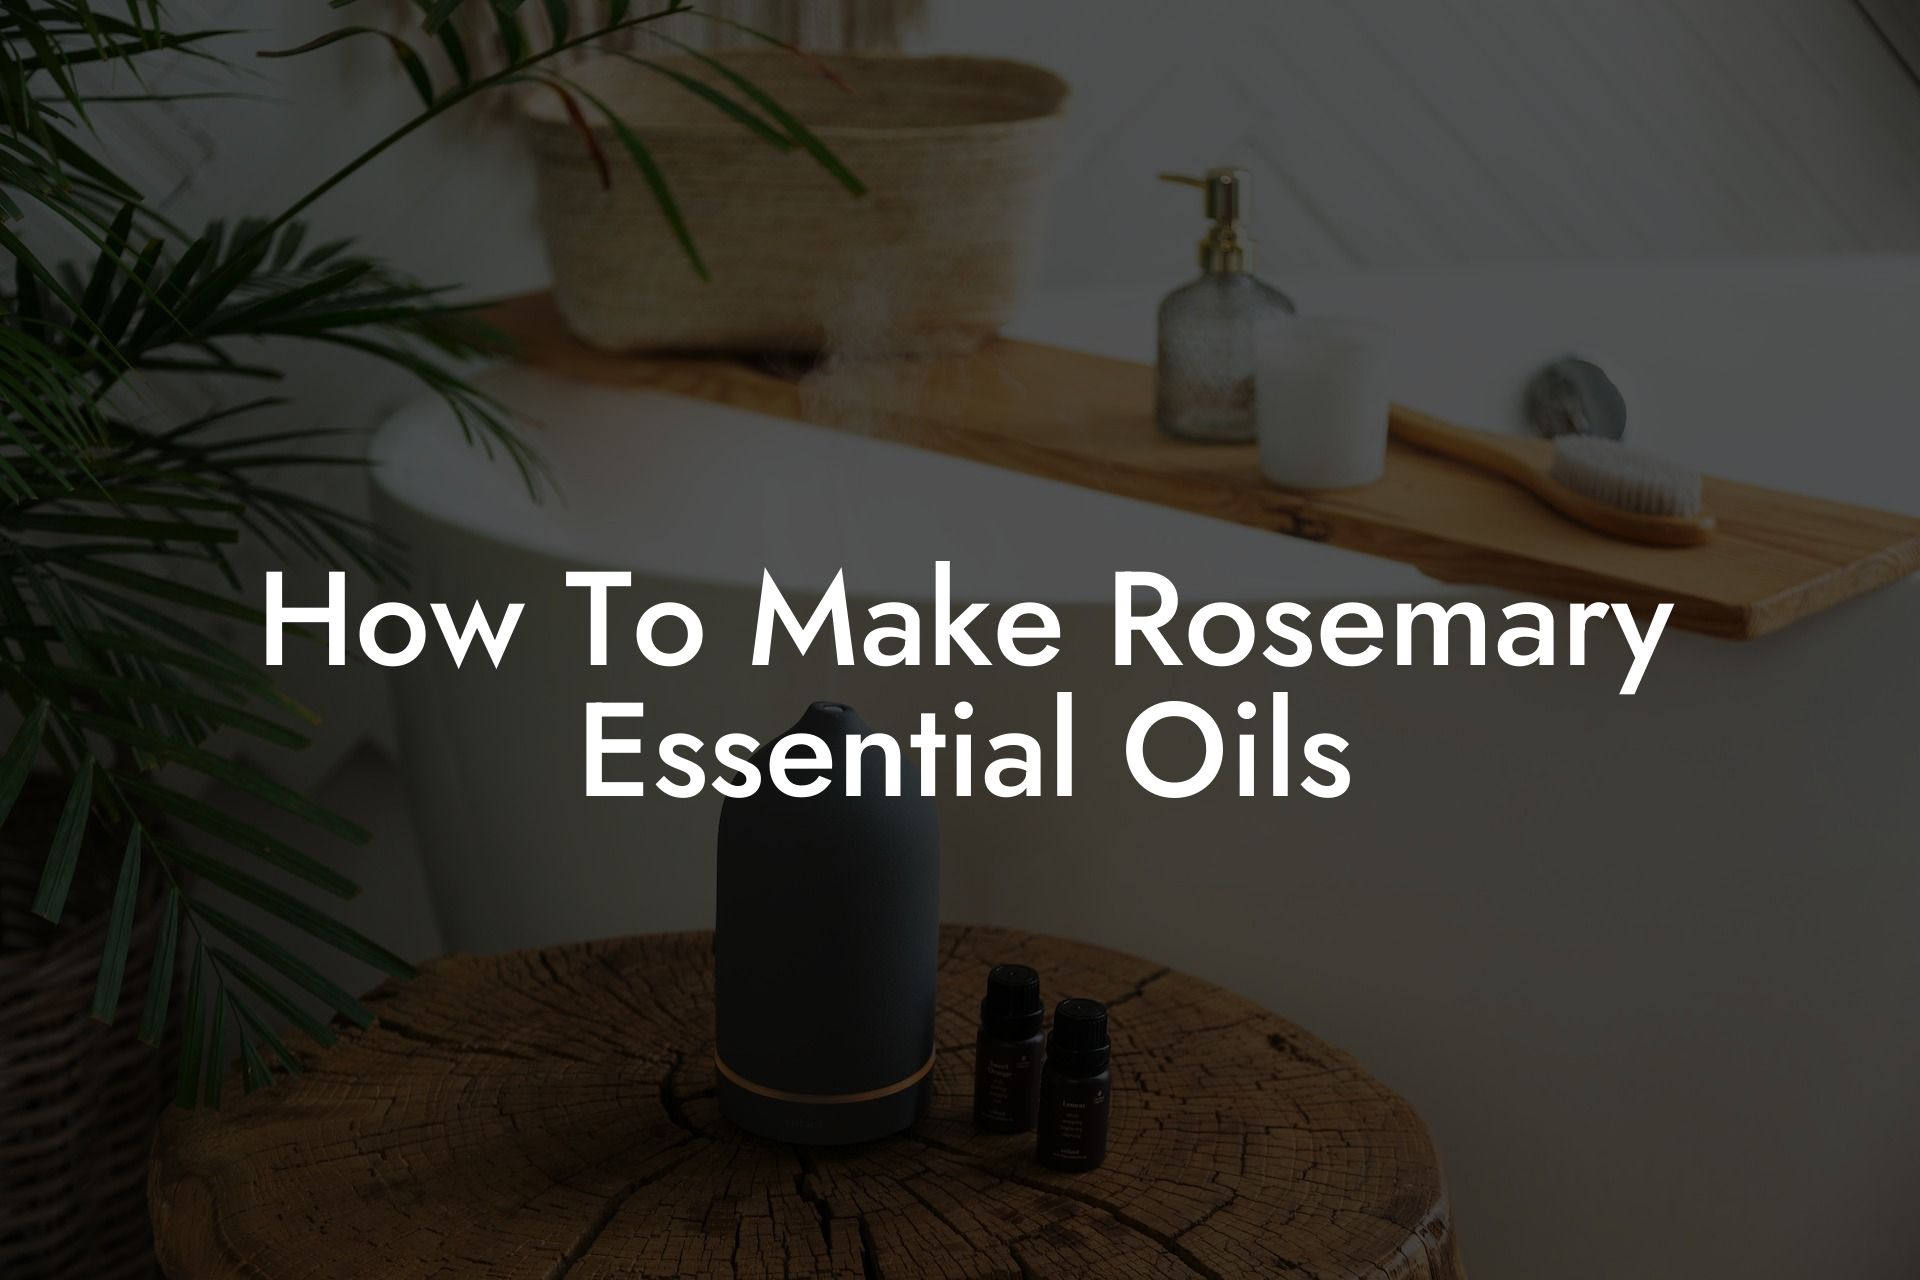 How To Make Rosemary Essential Oils